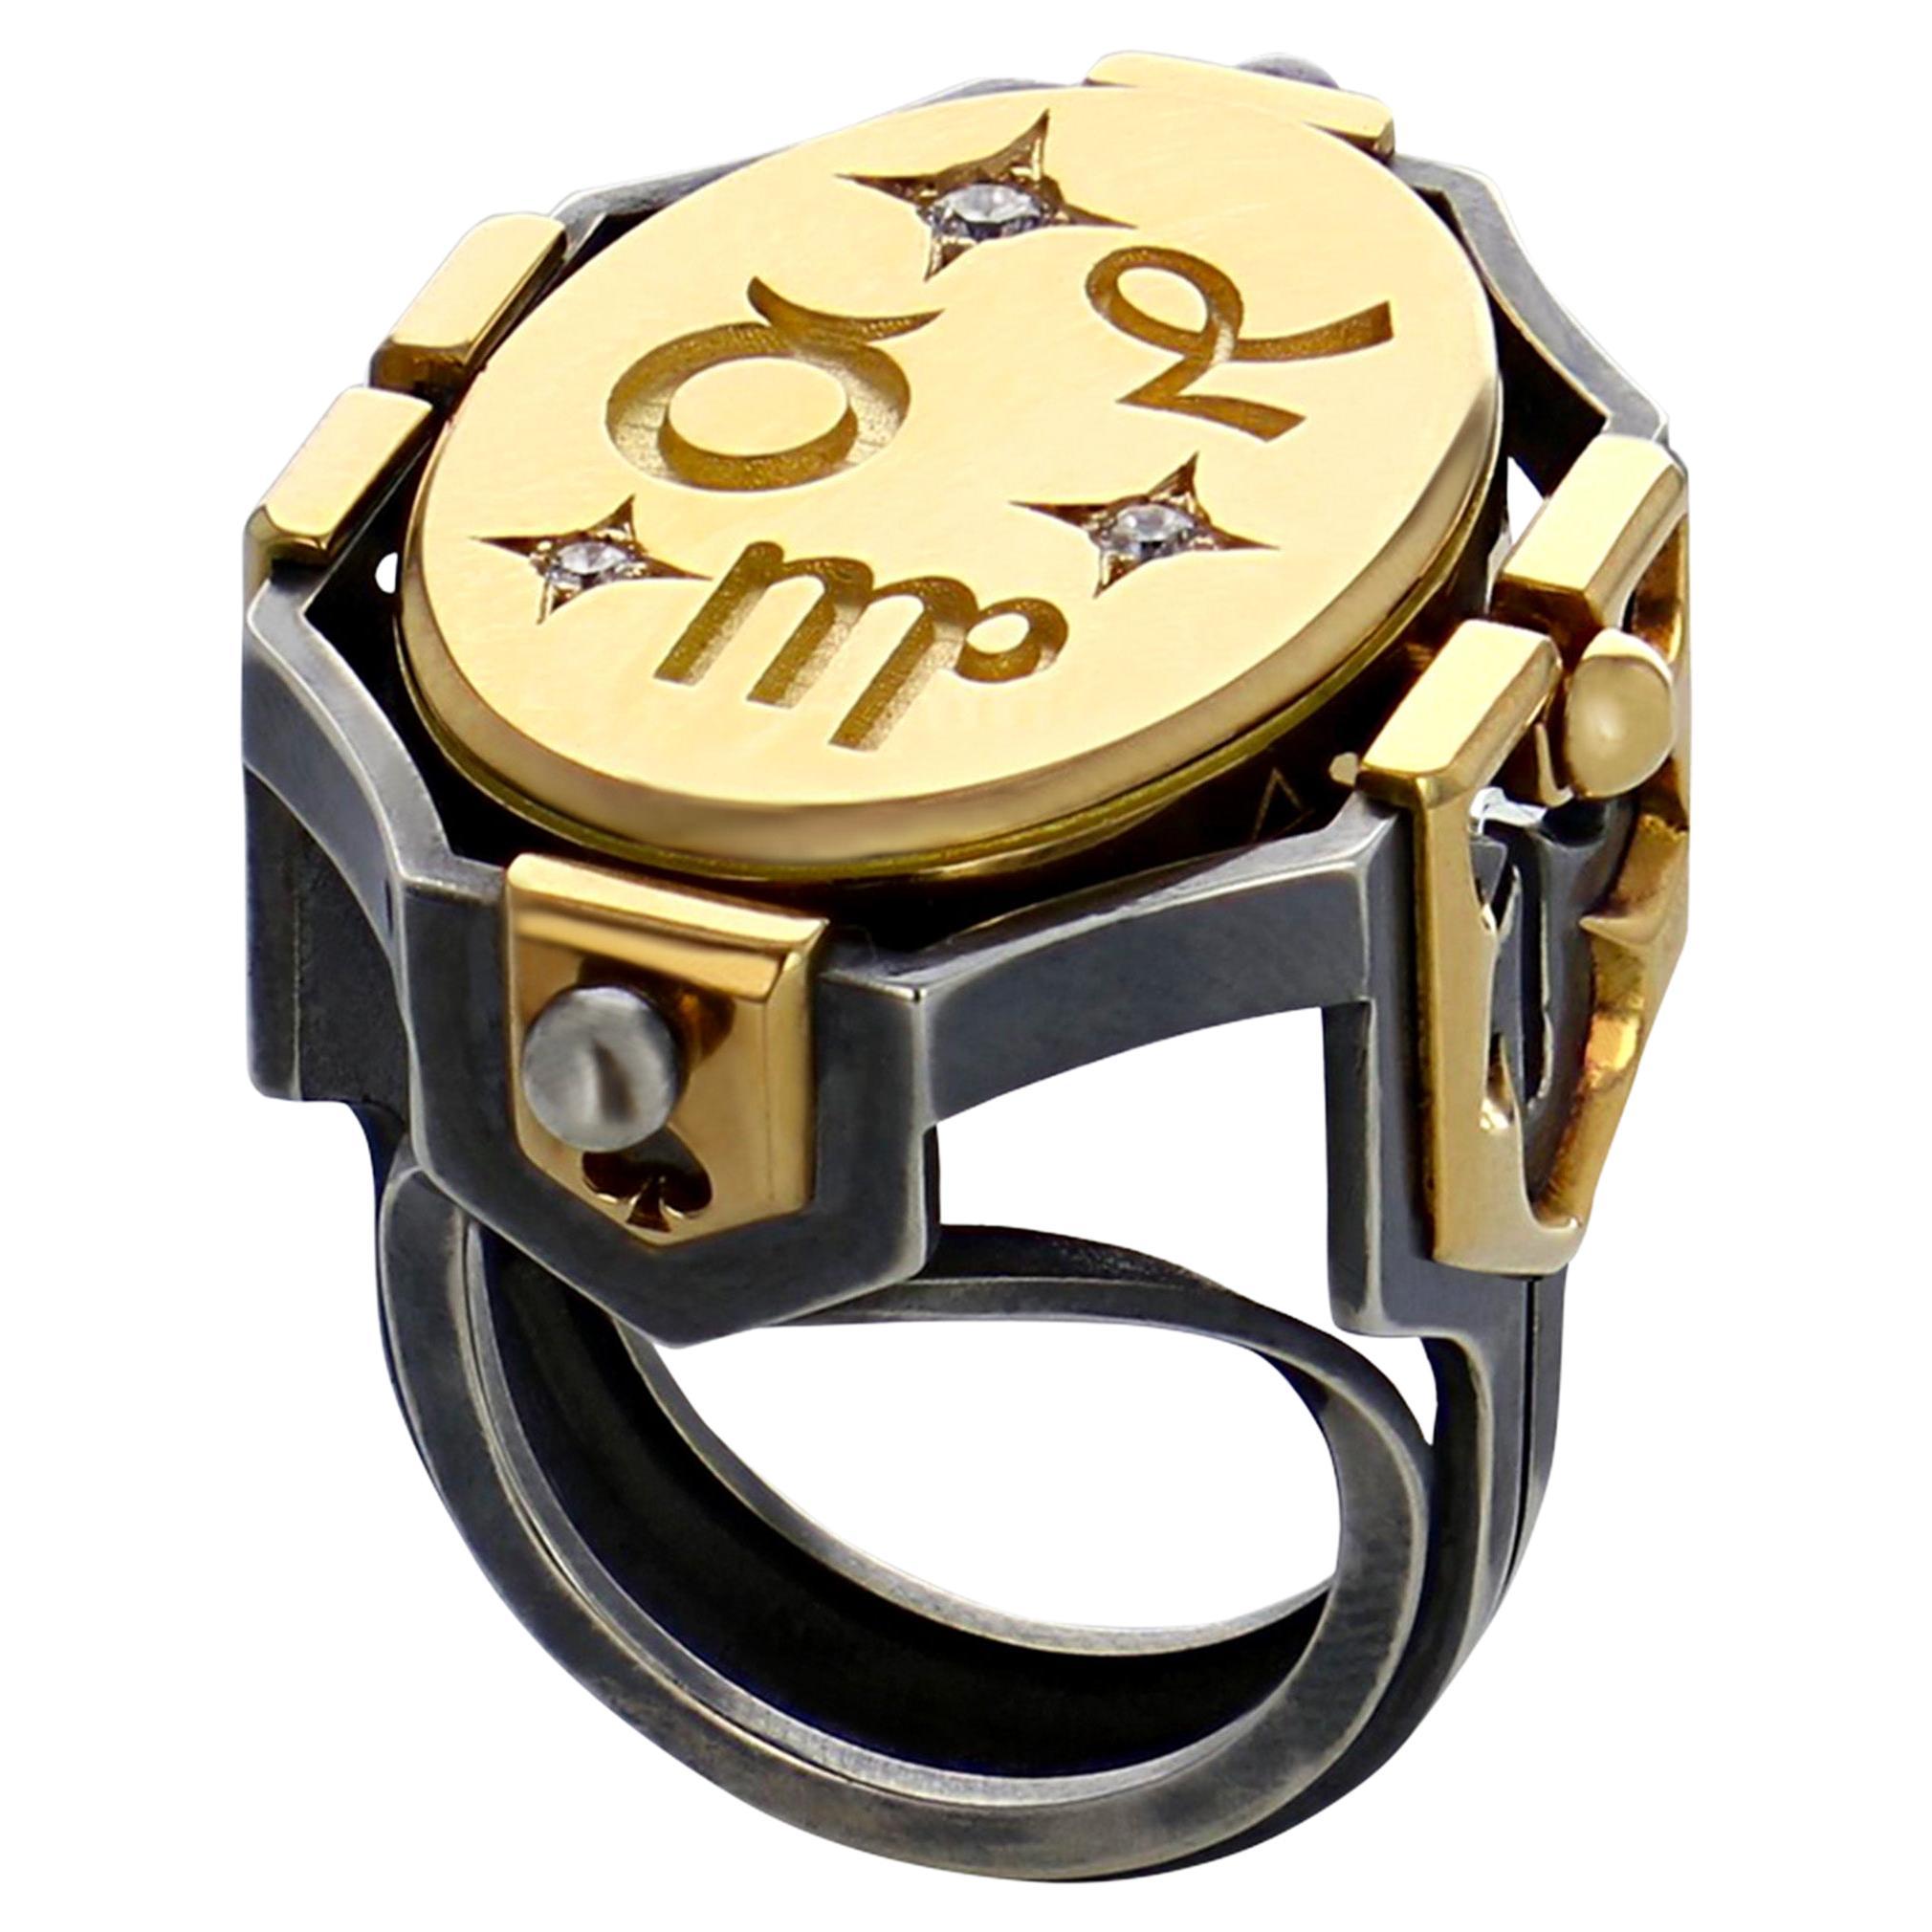 Yellow gold and distressed silver ring. Rotating medallion: on the gold side are engraved Earth signs (Virgo, Capricorn, Taurus) and on the onyx, a lion.

Details:
Onyx 
3 Diamonds: 0.1 cts
18k Yellow Gold: 18 g
Distressed Silver: 11 g
Made in France